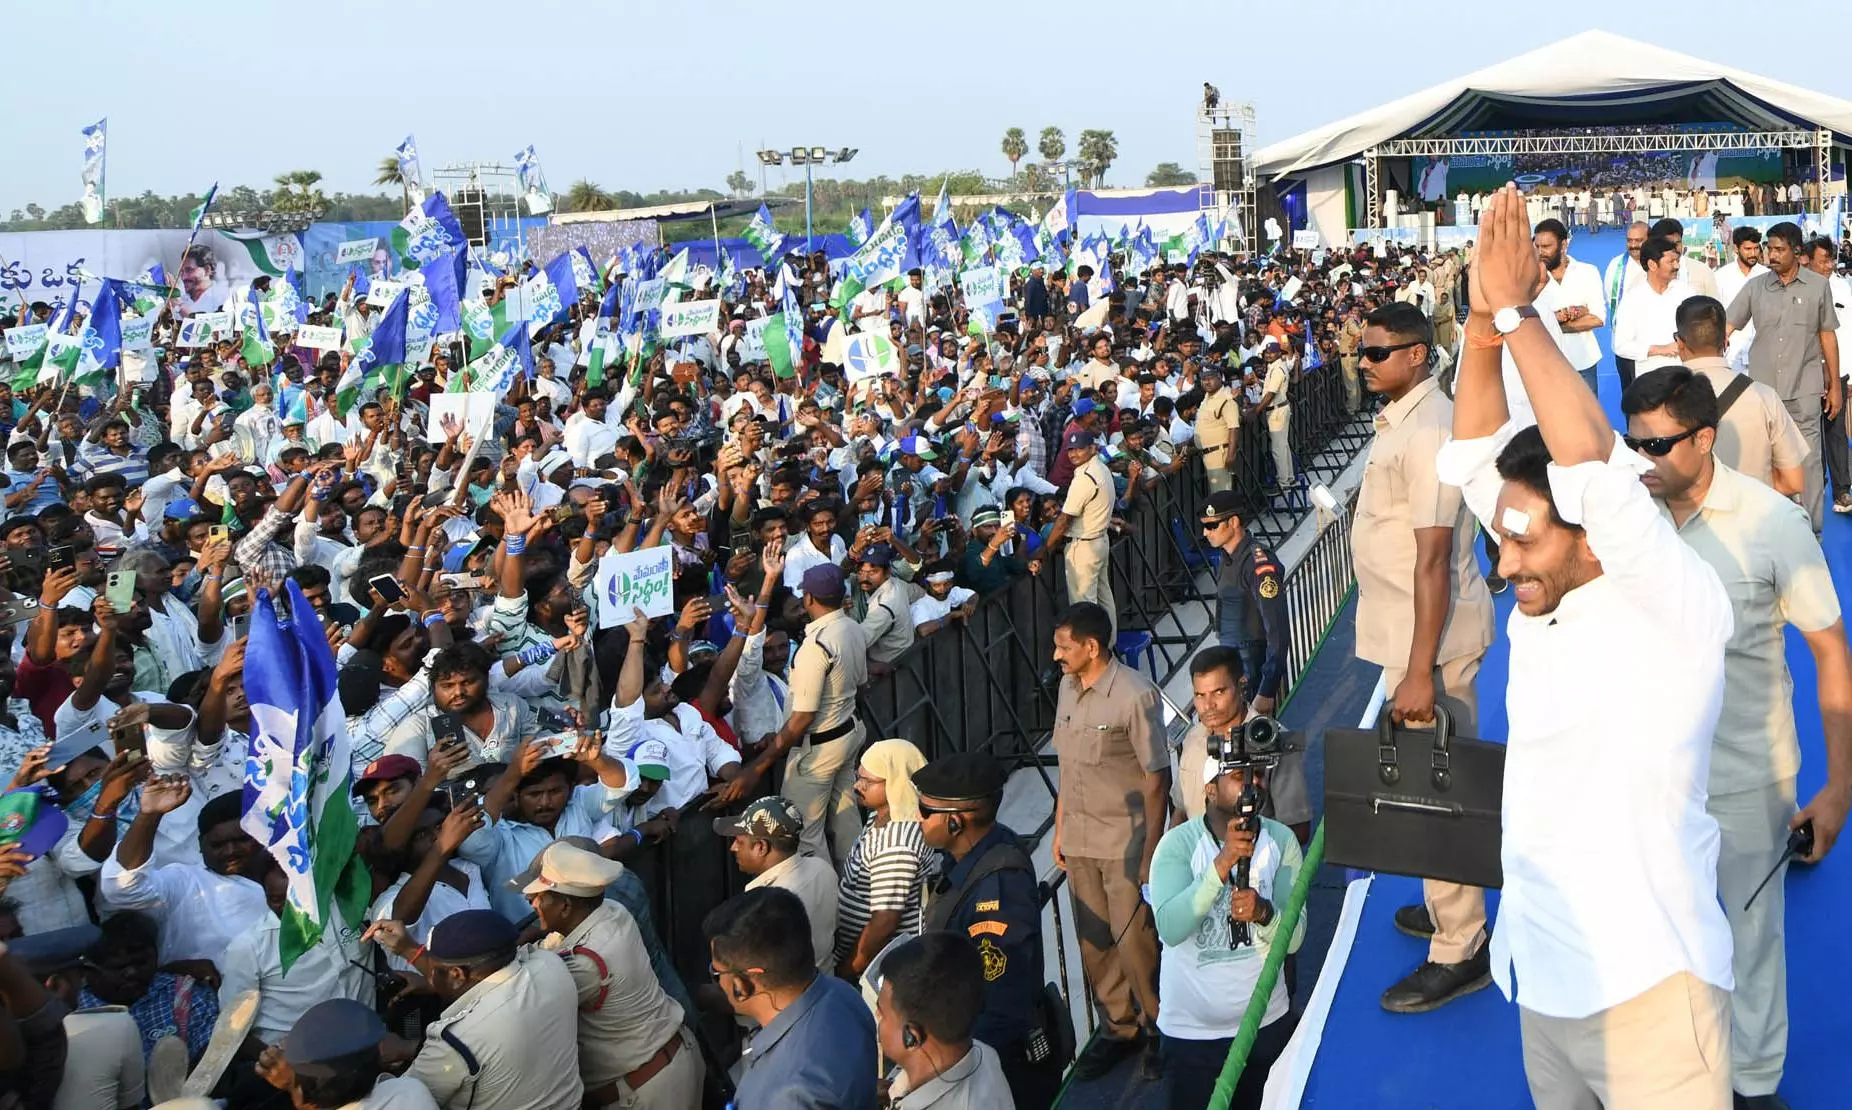 Throwing a stone at me will not avert the defeat of evil and rich forces: CM Jagan